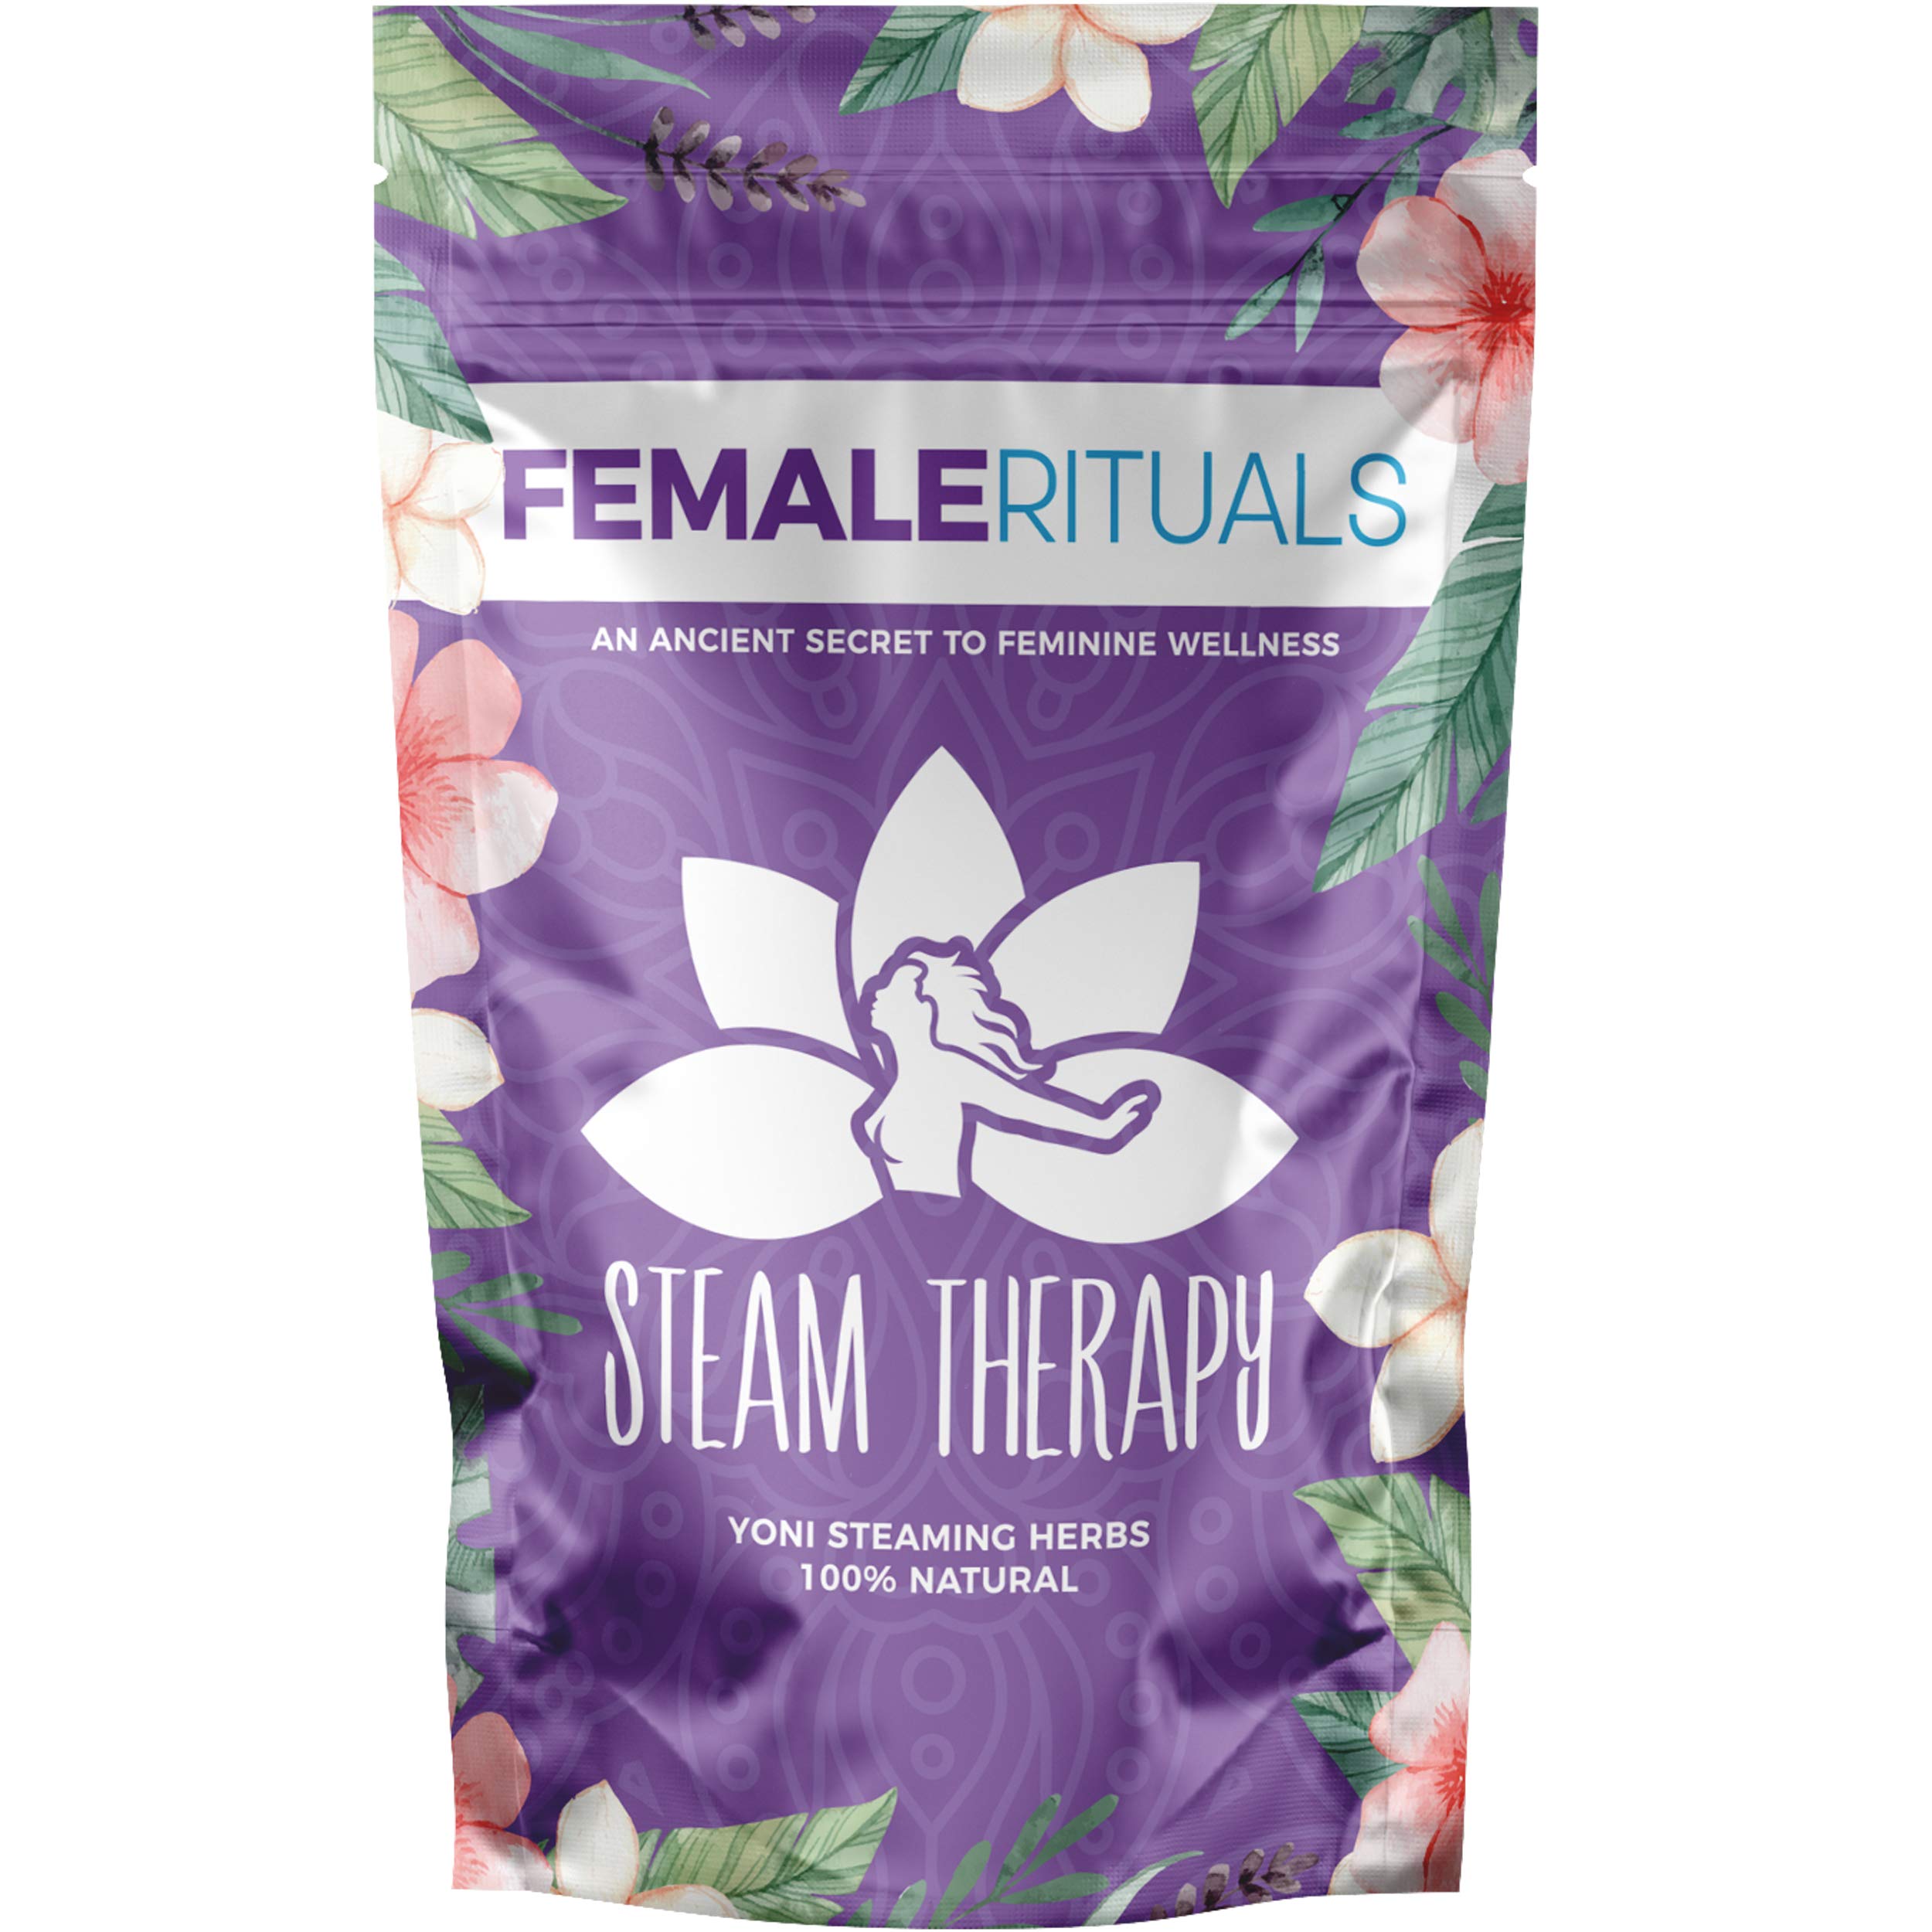 Book Cover Female Rituals Yoni Steam Herbs - Natural Vaginal Steamer to Detox & Cleanse - V Steam at Home Kit for Menstrual Support, PH Balance & Dryness - Gentle Female Herbs STEAM THERAPY 2 Ounce (Pack of 1)